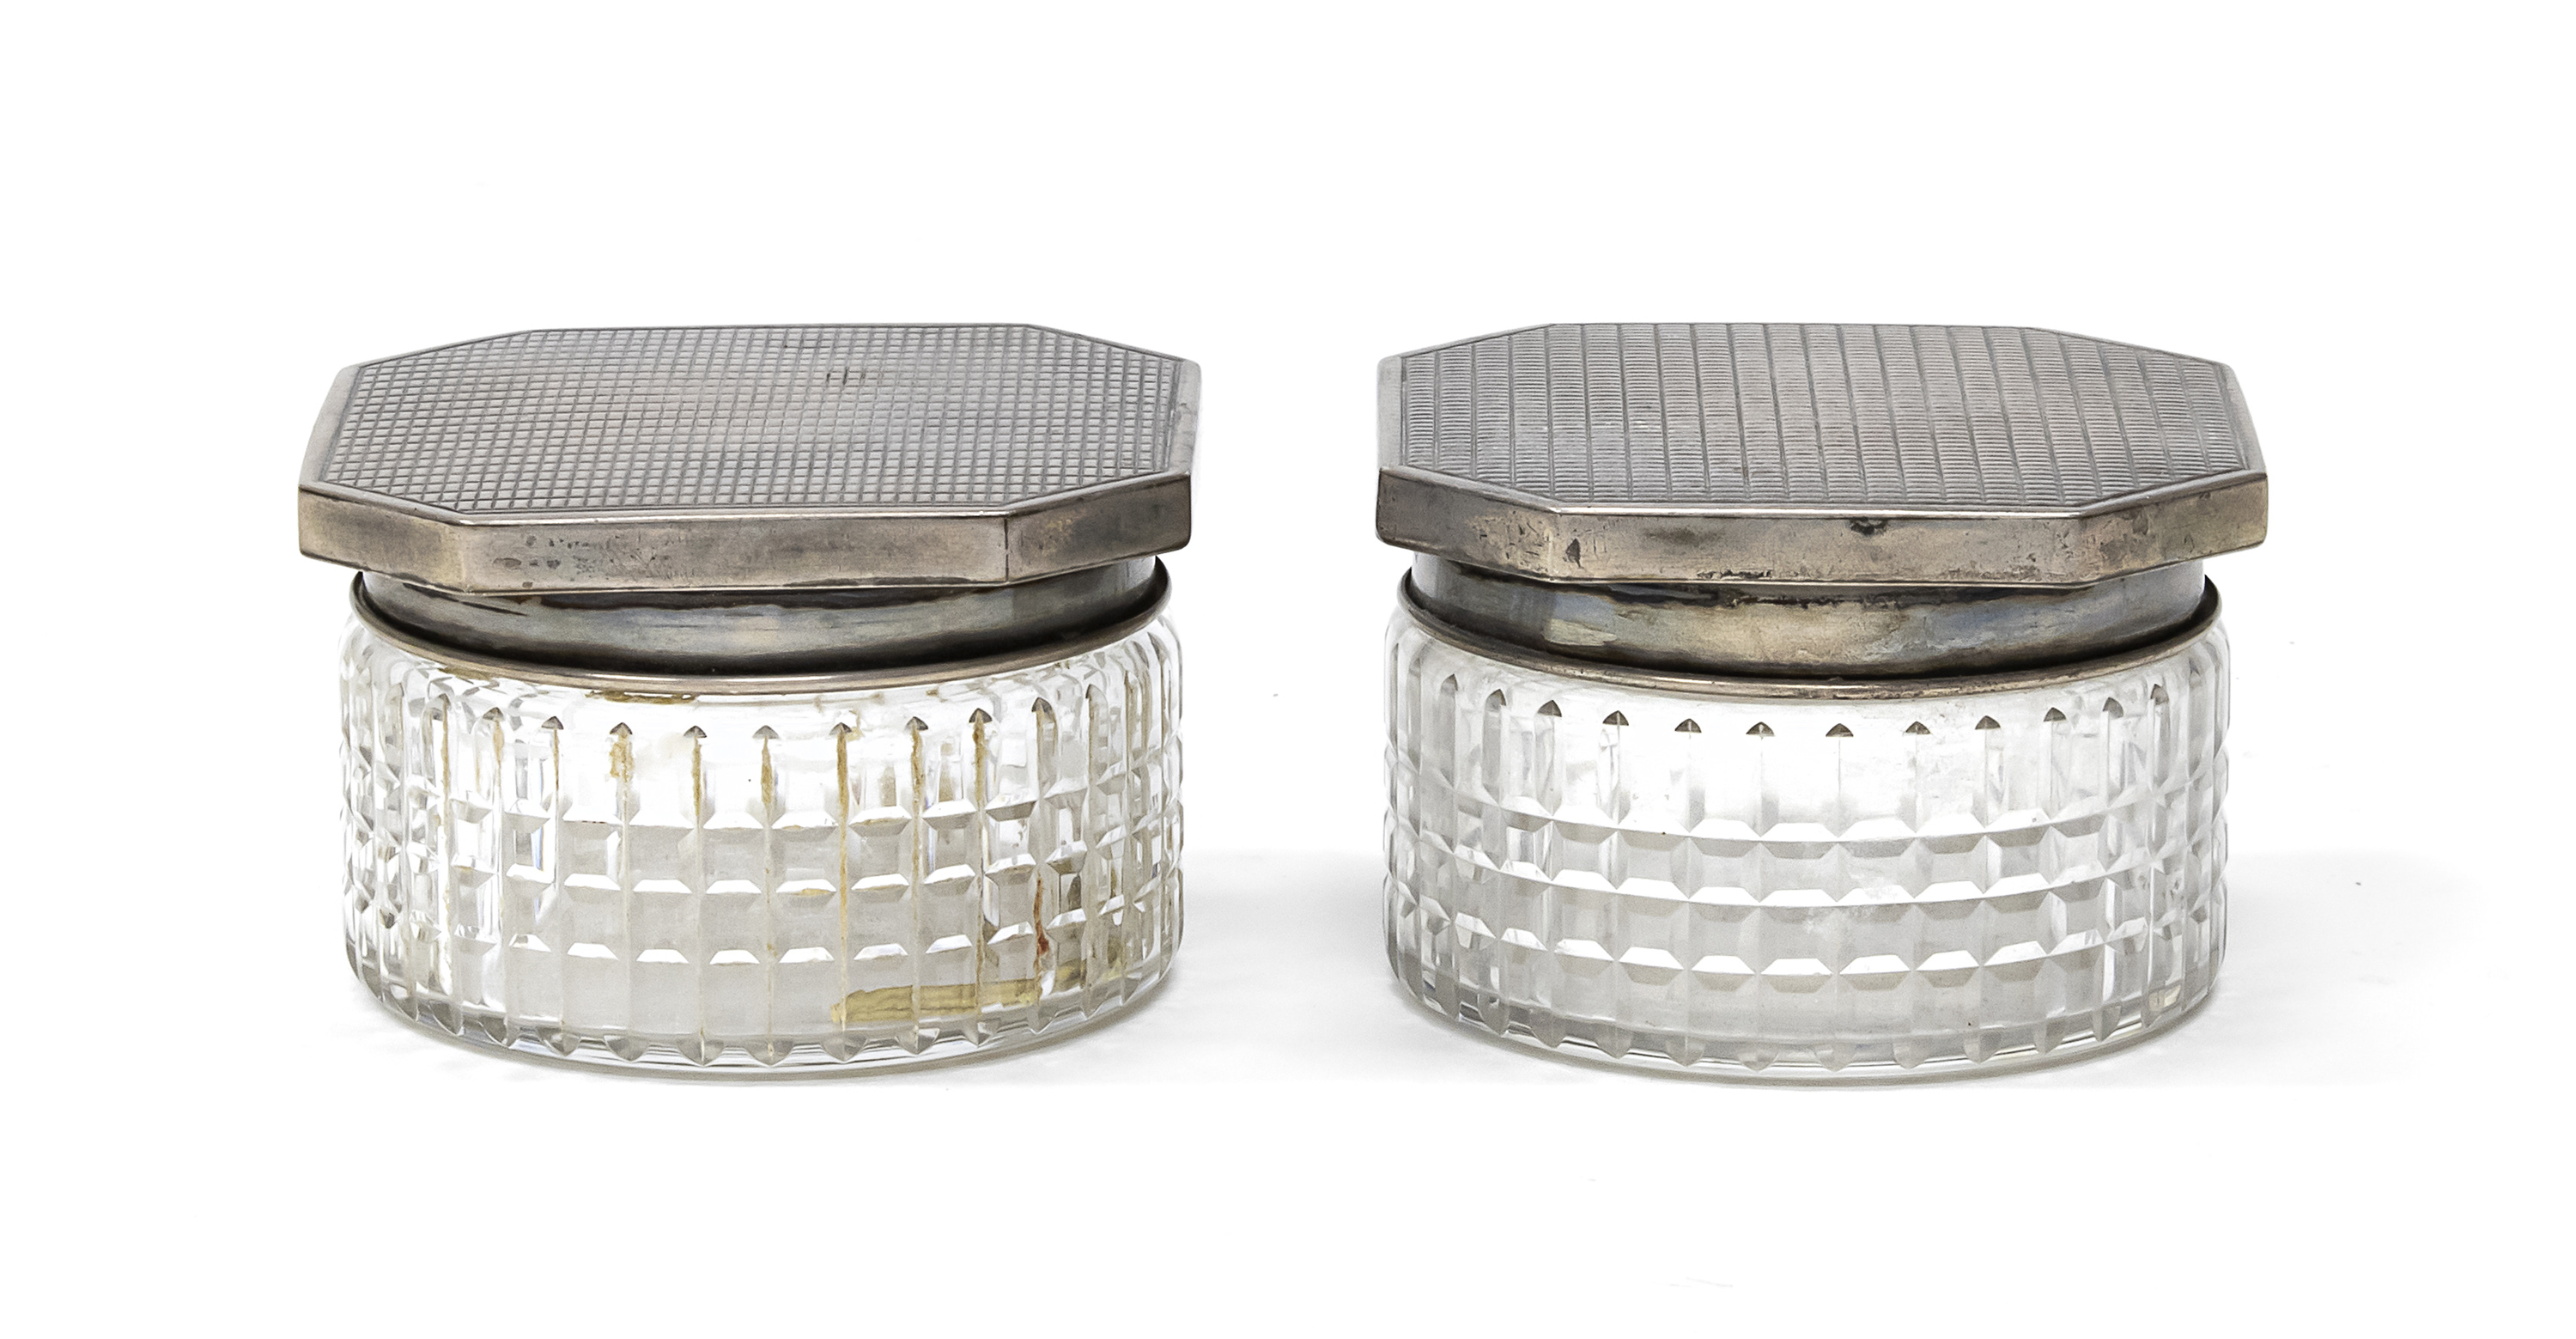 PAIR OF GLASS AND SILVER POWDER TINS ITALY EARLY 20TH CENTURY